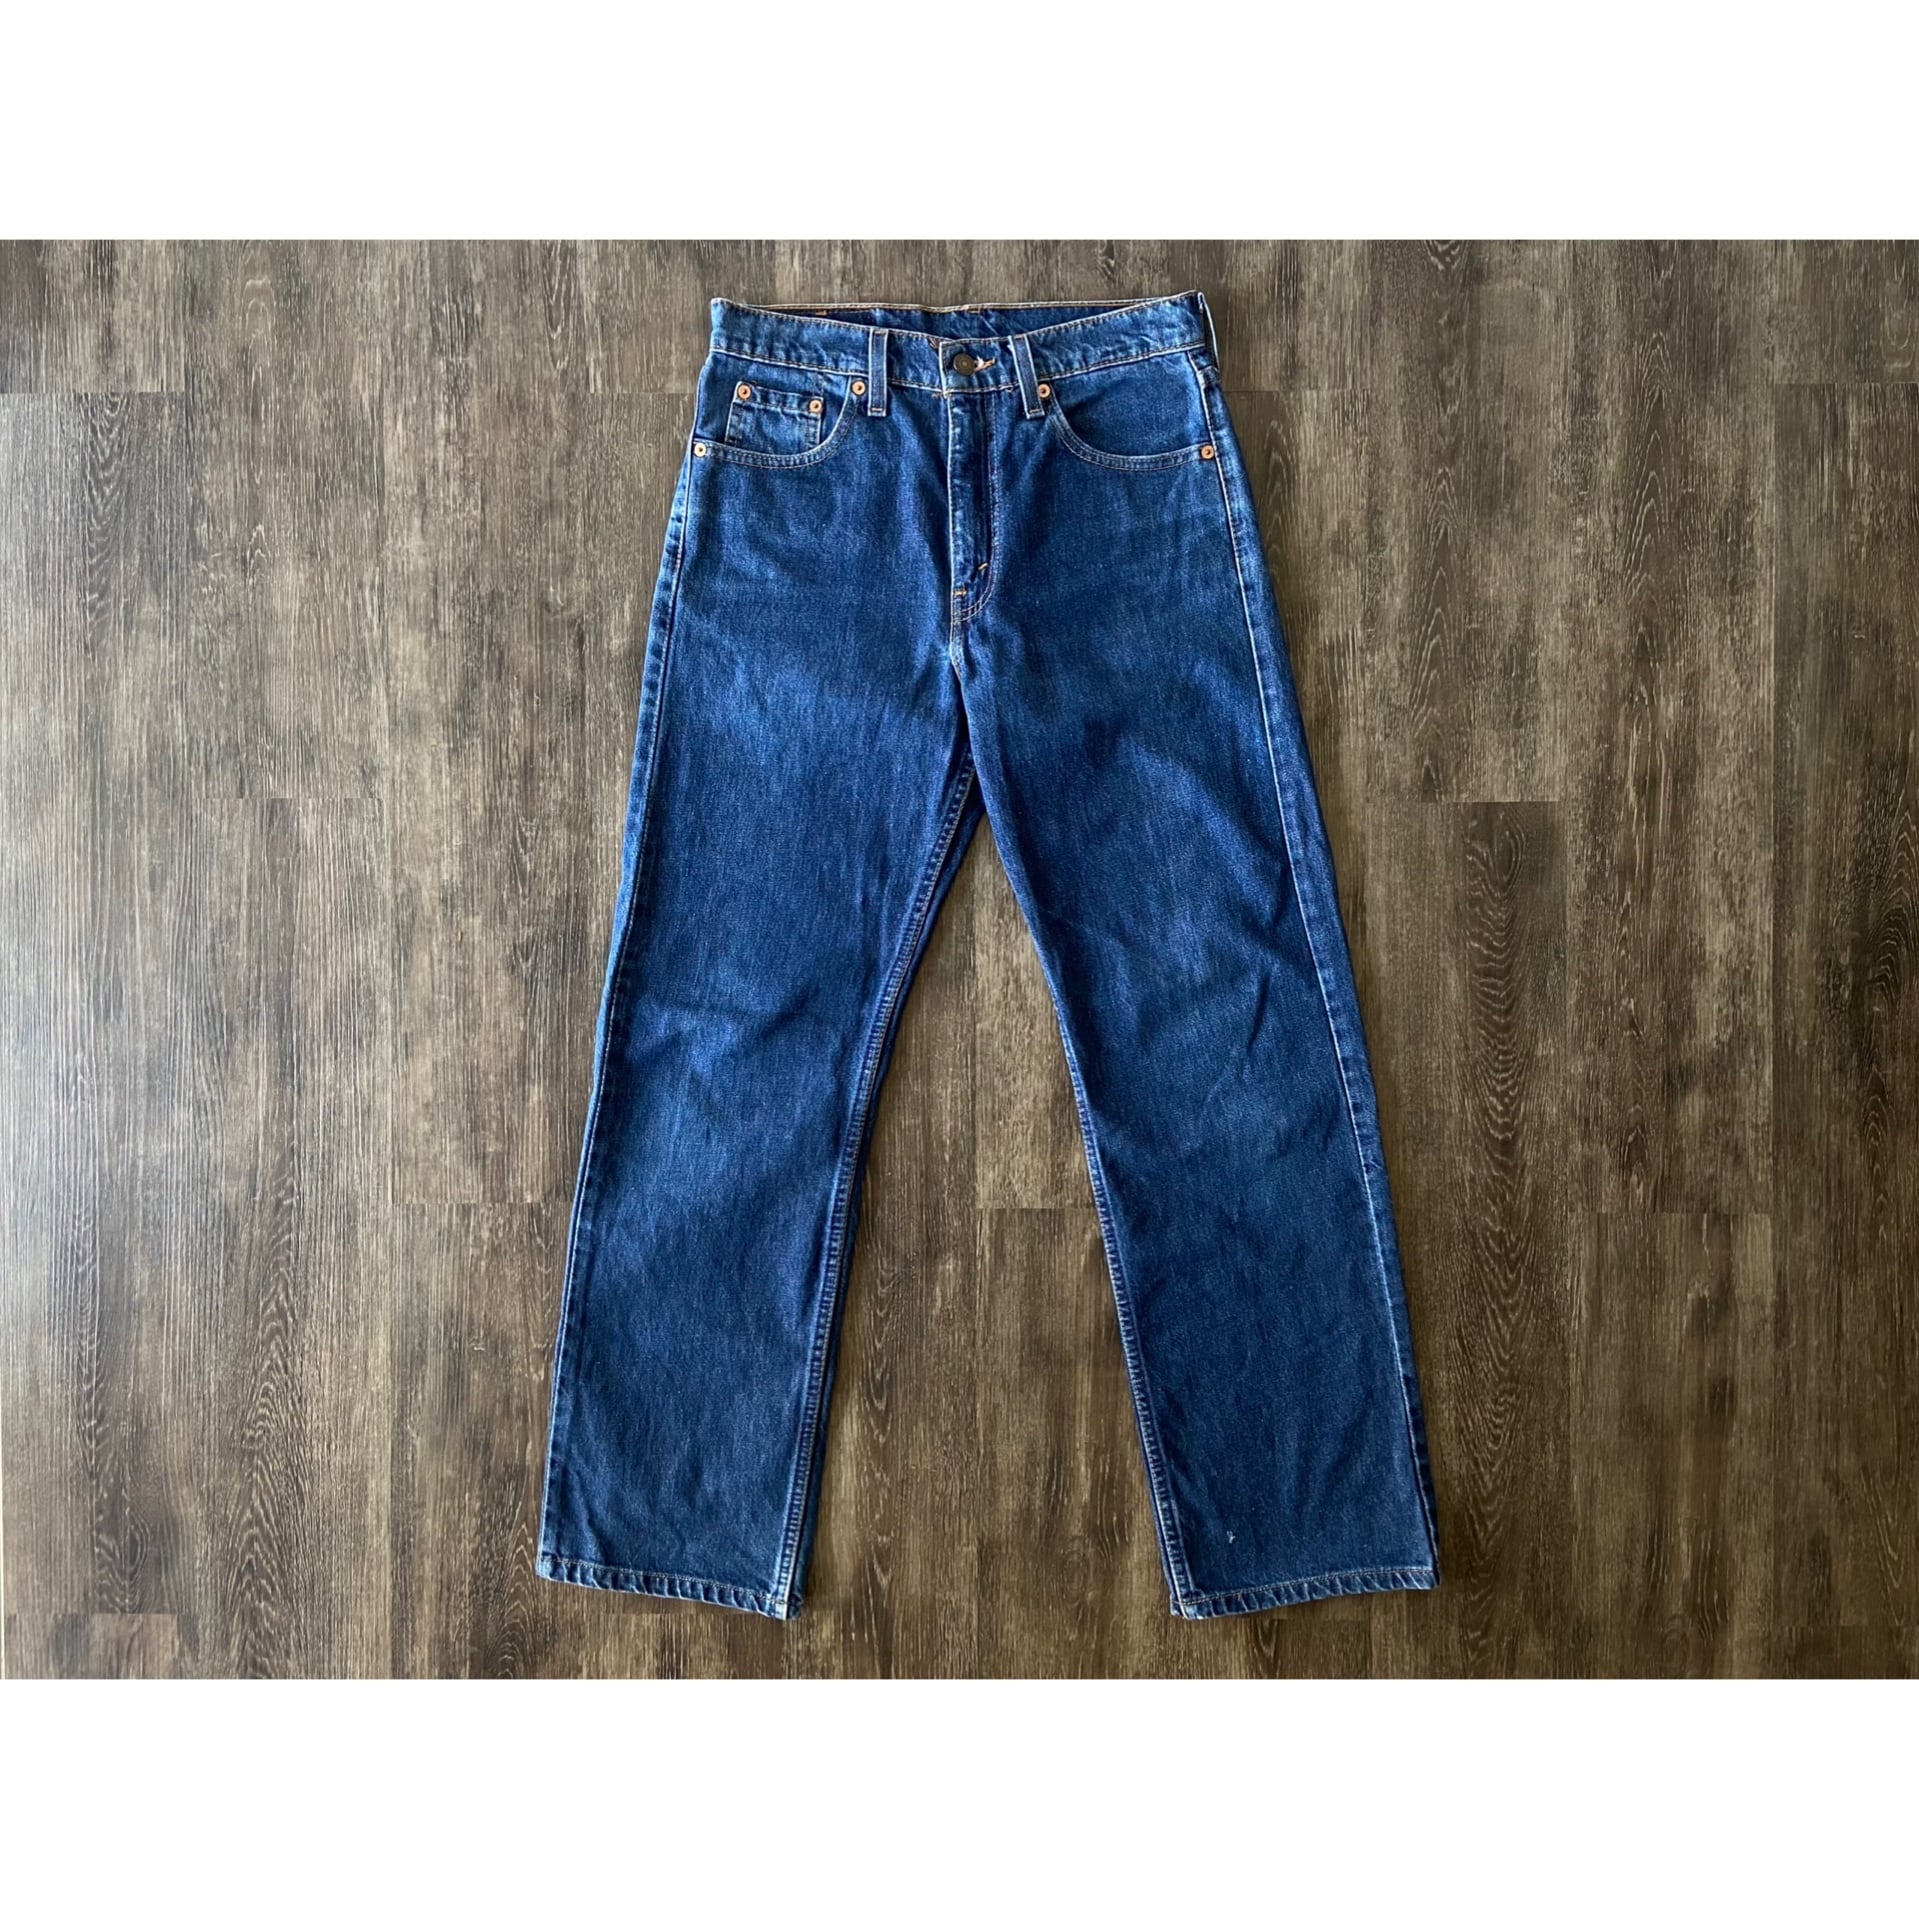 70s Levis 519 w34 l33 made in USA